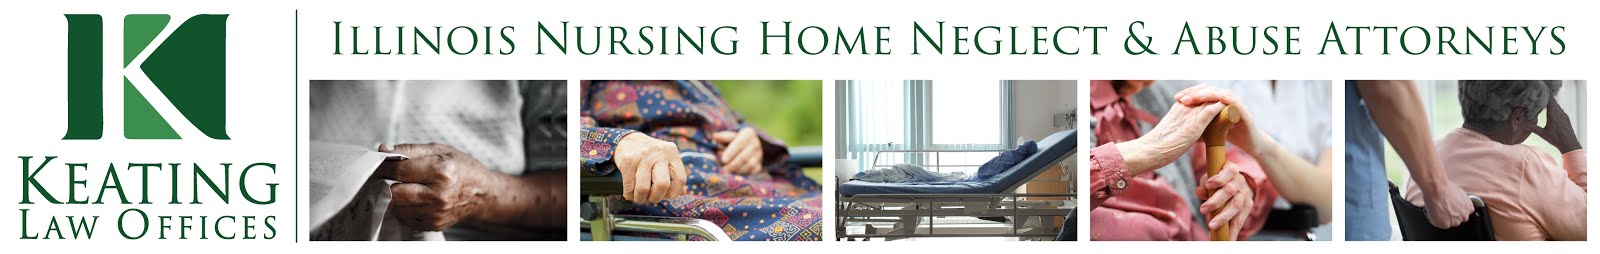 Nursing Home Abuse and Neglect: Illinois Nursing Home Attorney Mike Keating